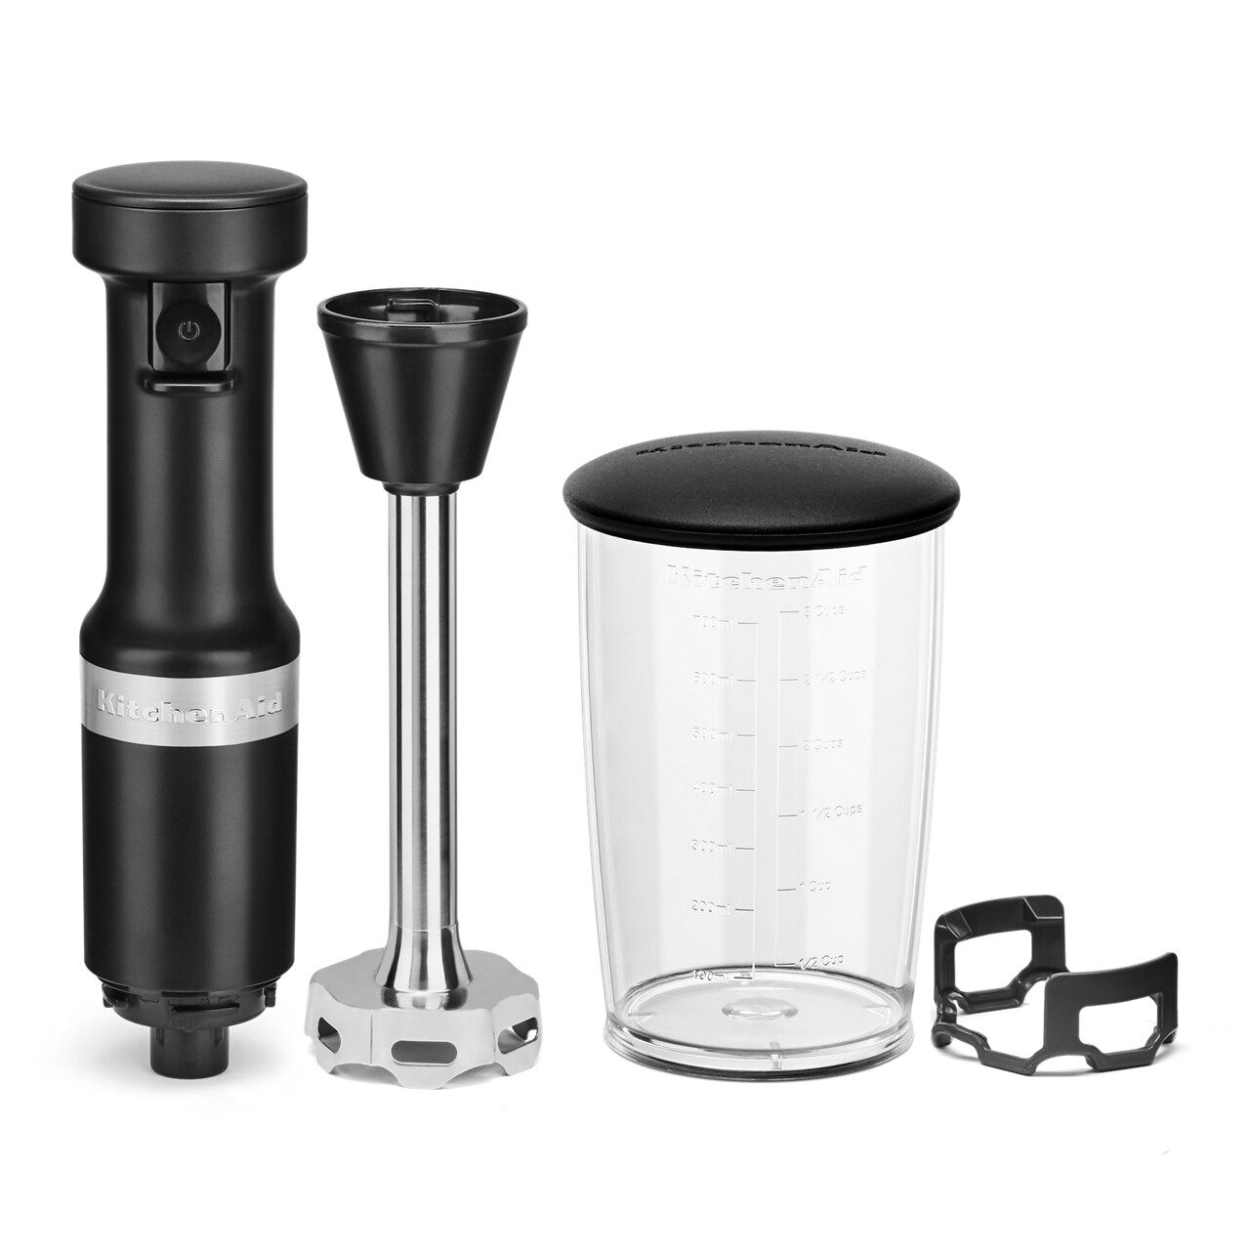 Neon leaf Hand Blender with mixer grinder Variable Speed Control.